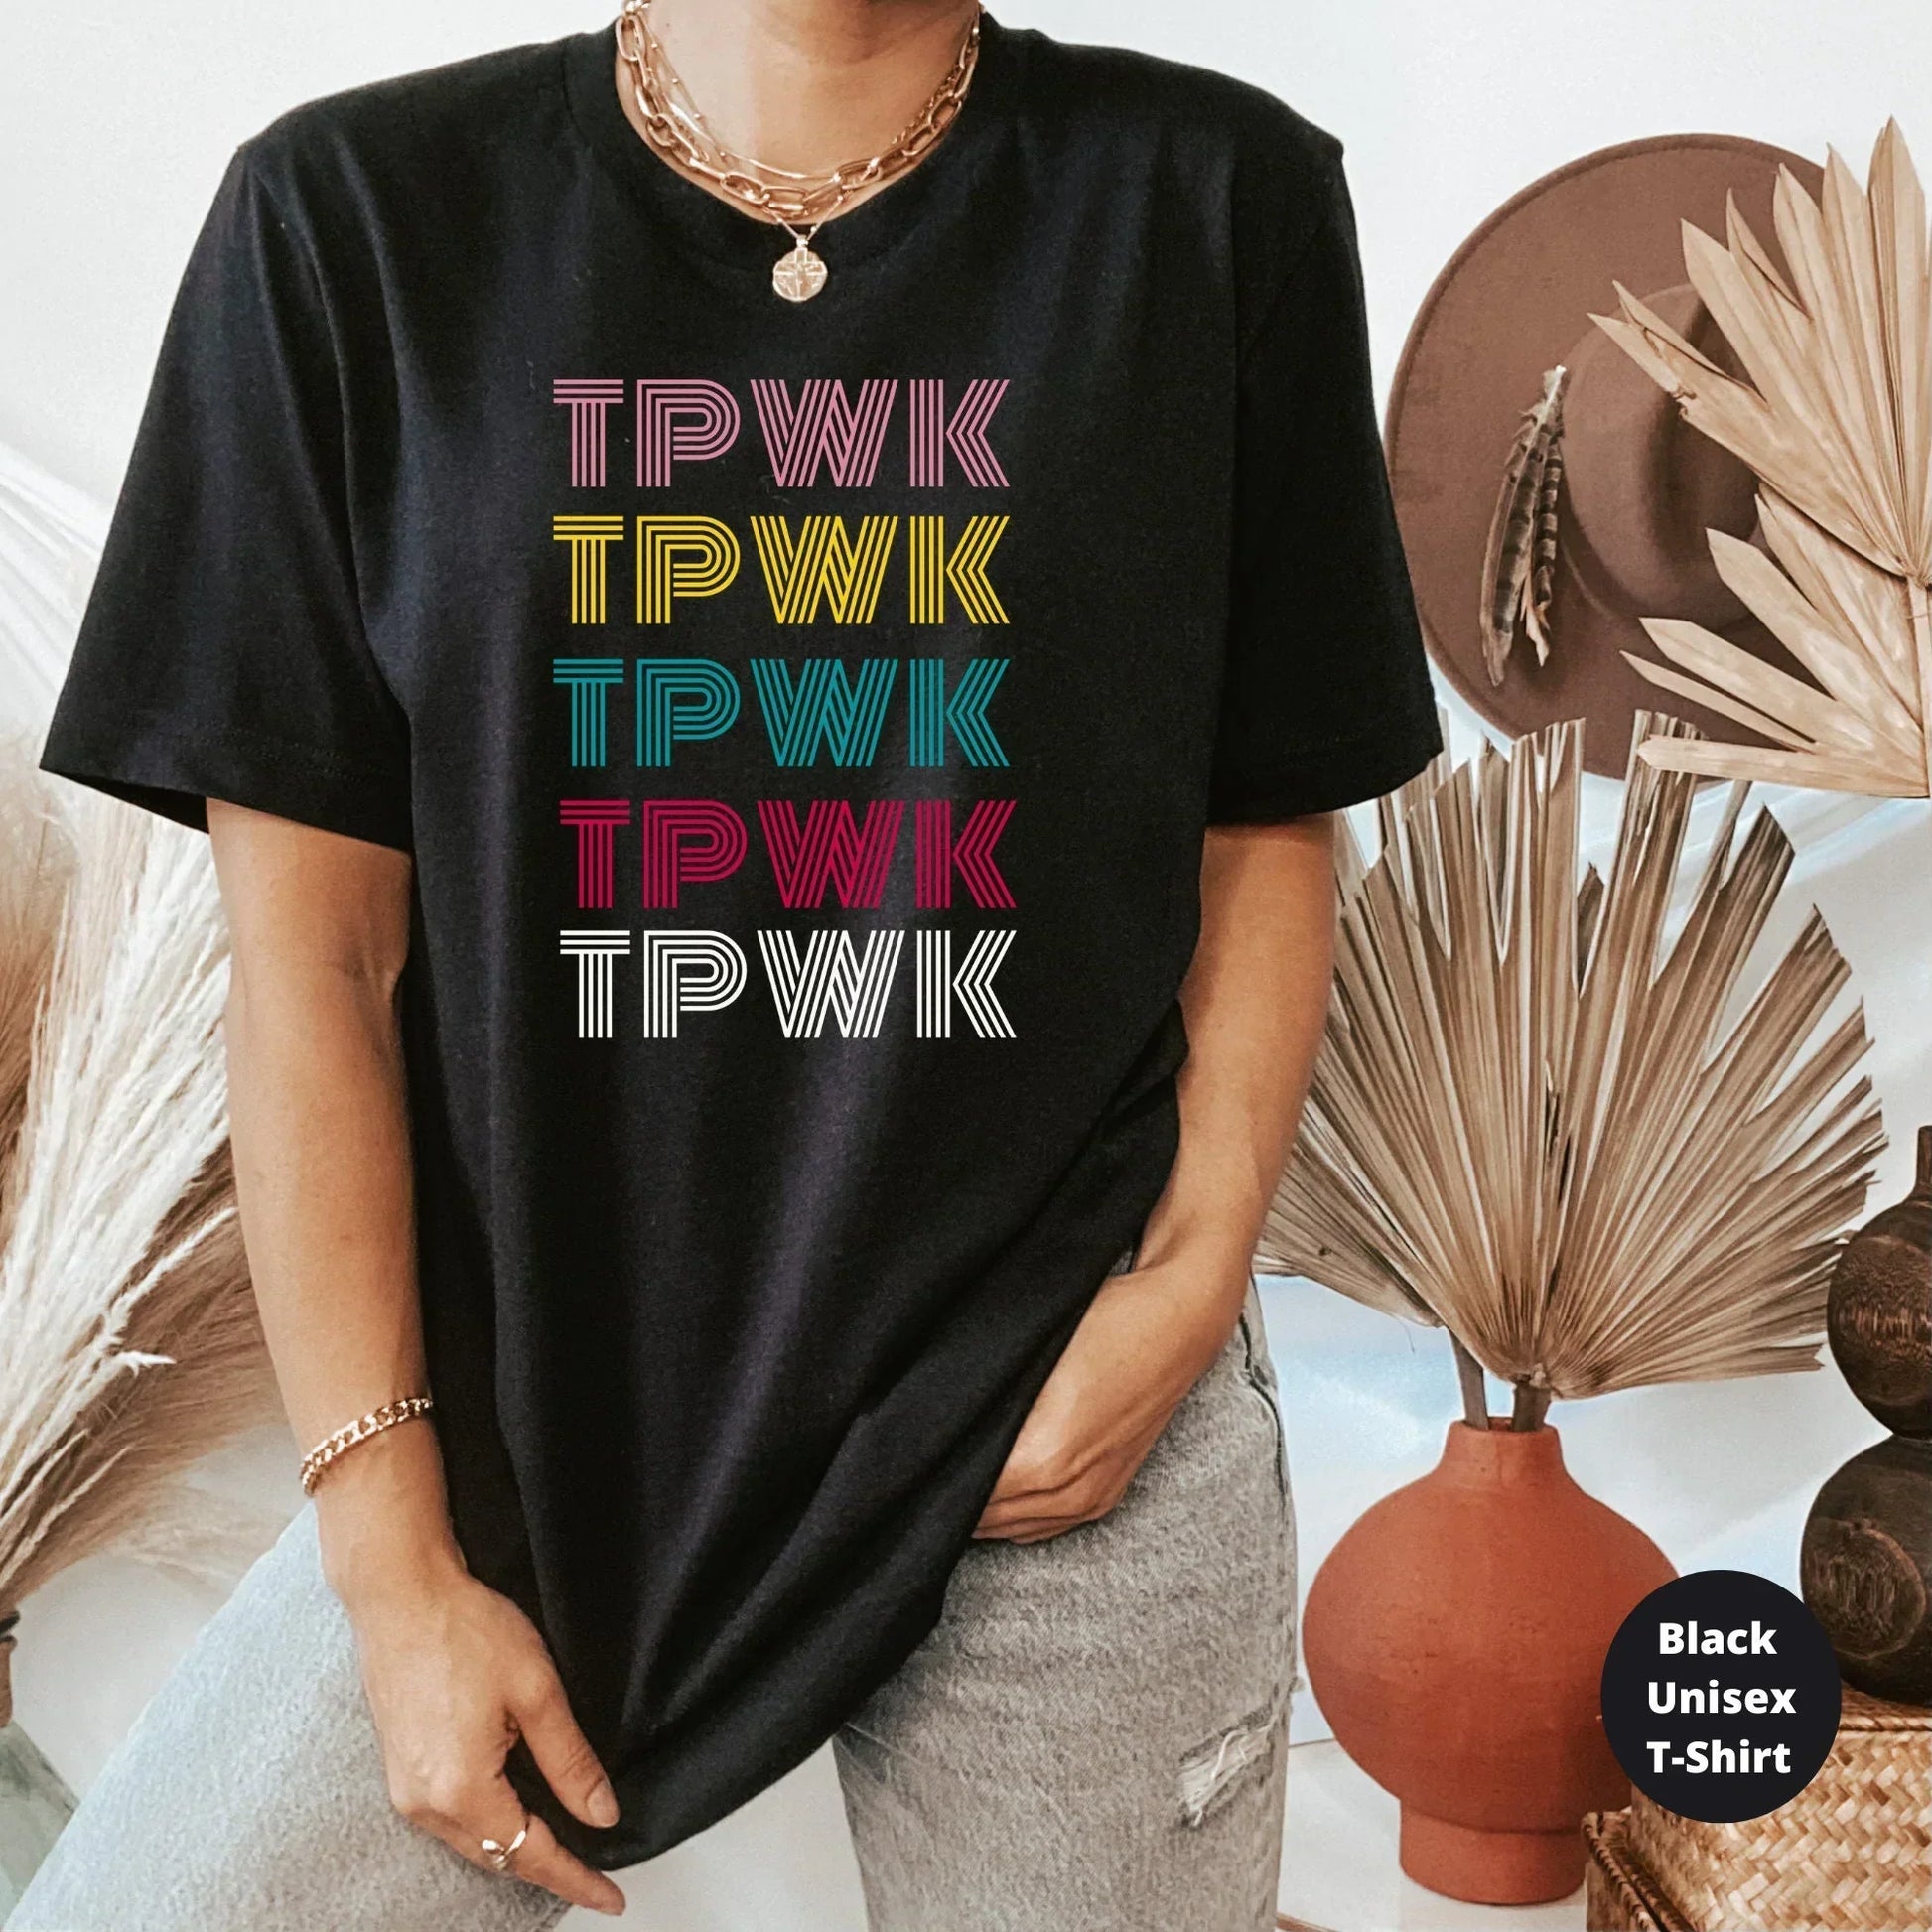 Retro TPWK Shirt, Treat People With Kindness, Harry Styles Shirt, Fine Line Shirt, Kindness Sweatshirt for Women, One Direction Hoodie